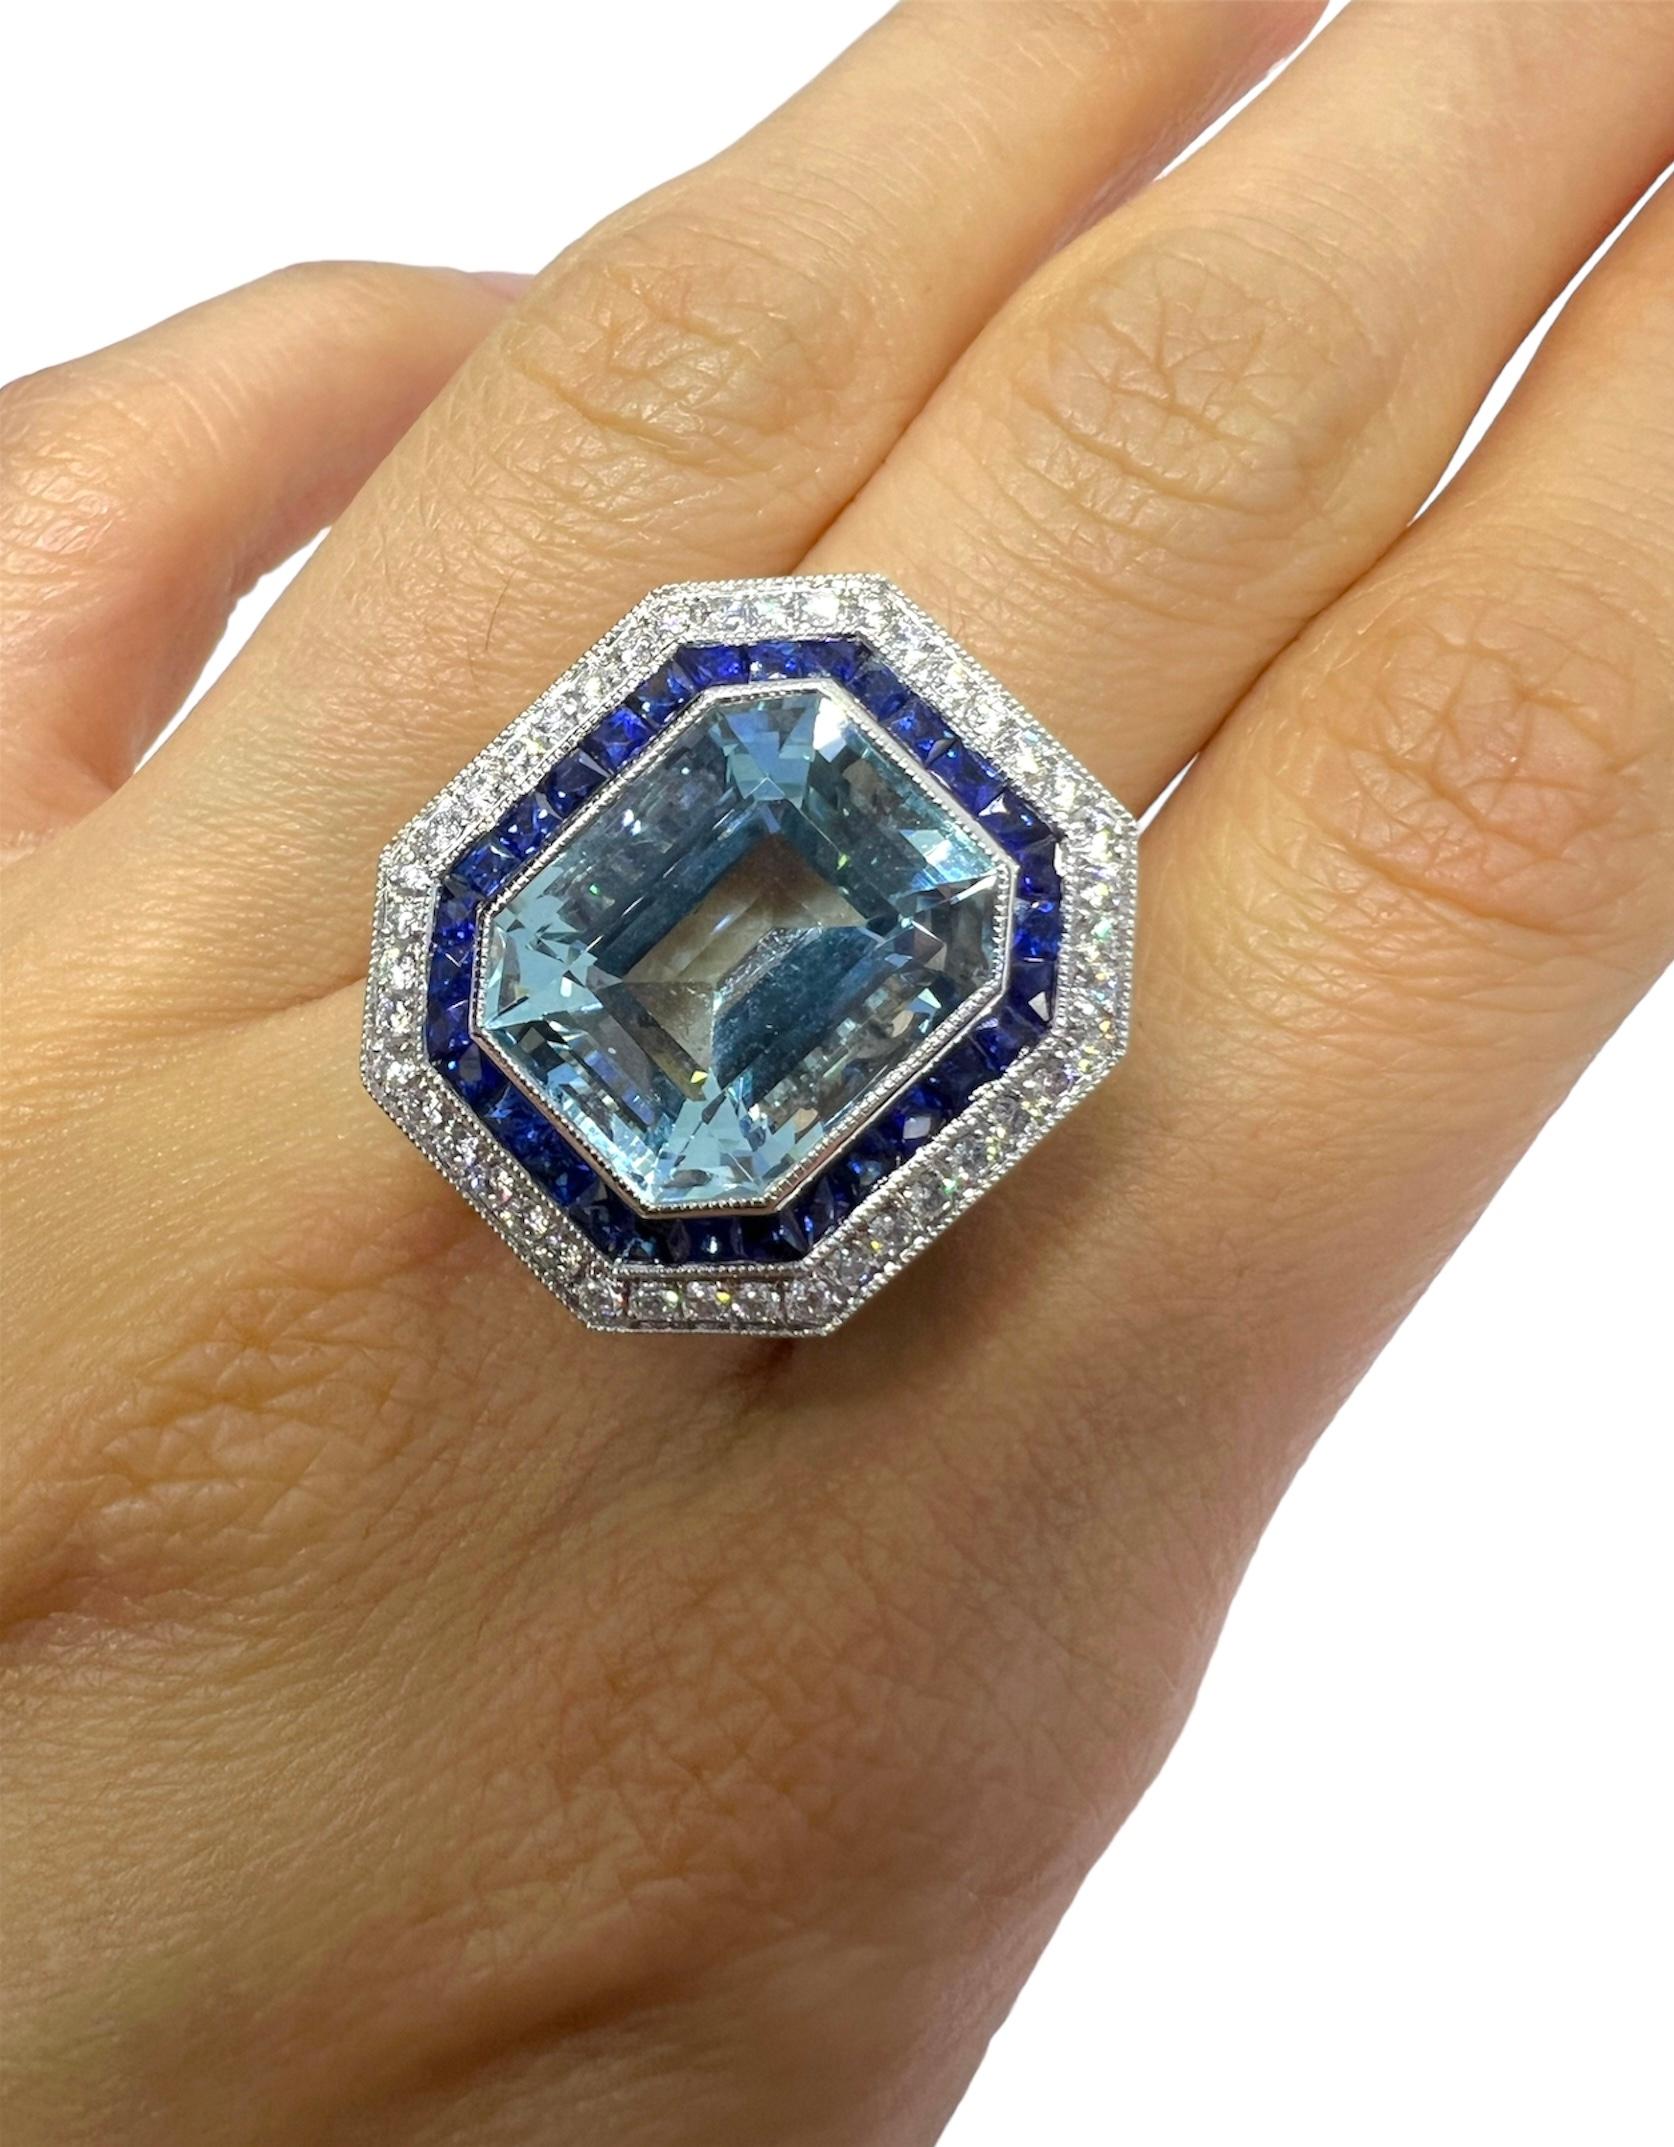 Platinum ring with 9.20 carat aquamarine, 1.20 carat diamond and 1.27 carat sapphire.

Sophia D by Joseph Dardashti LTD has been known worldwide for 35 years and are inspired by classic Art Deco design that merges with modern manufacturing